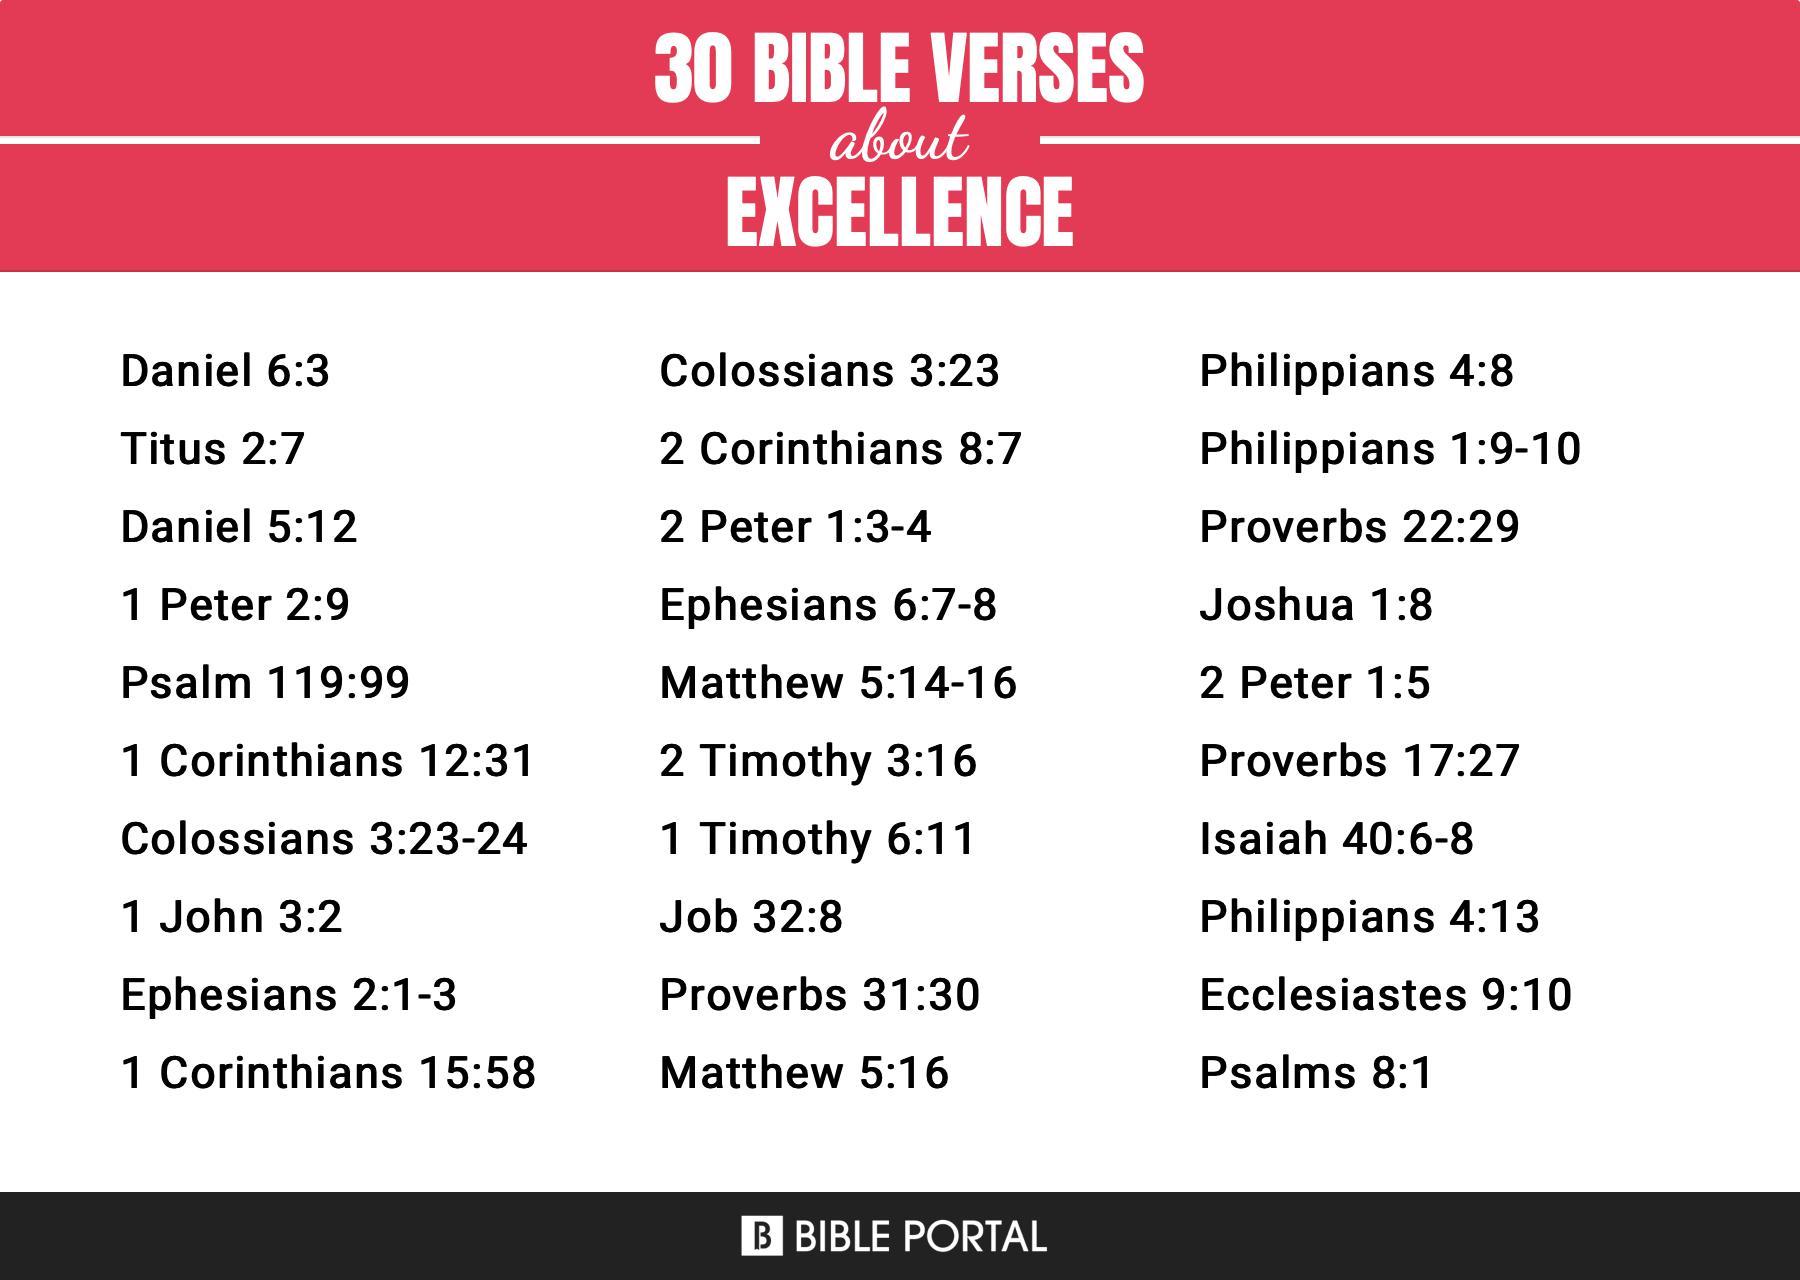 82 Bible Verses about Excellence